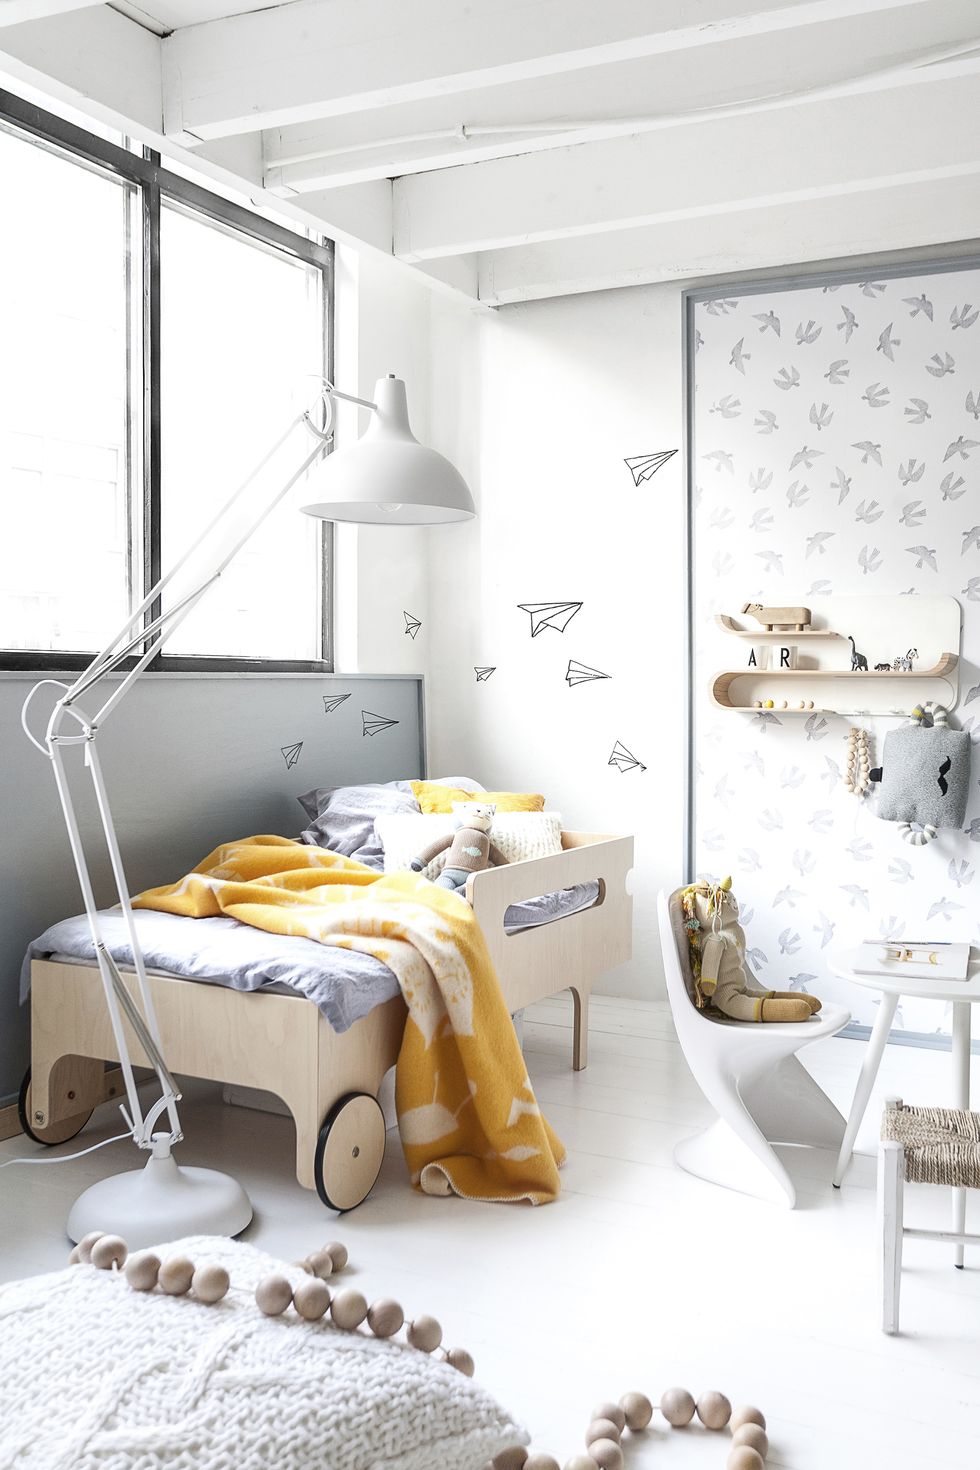 Children's and toddler bedroom ideas